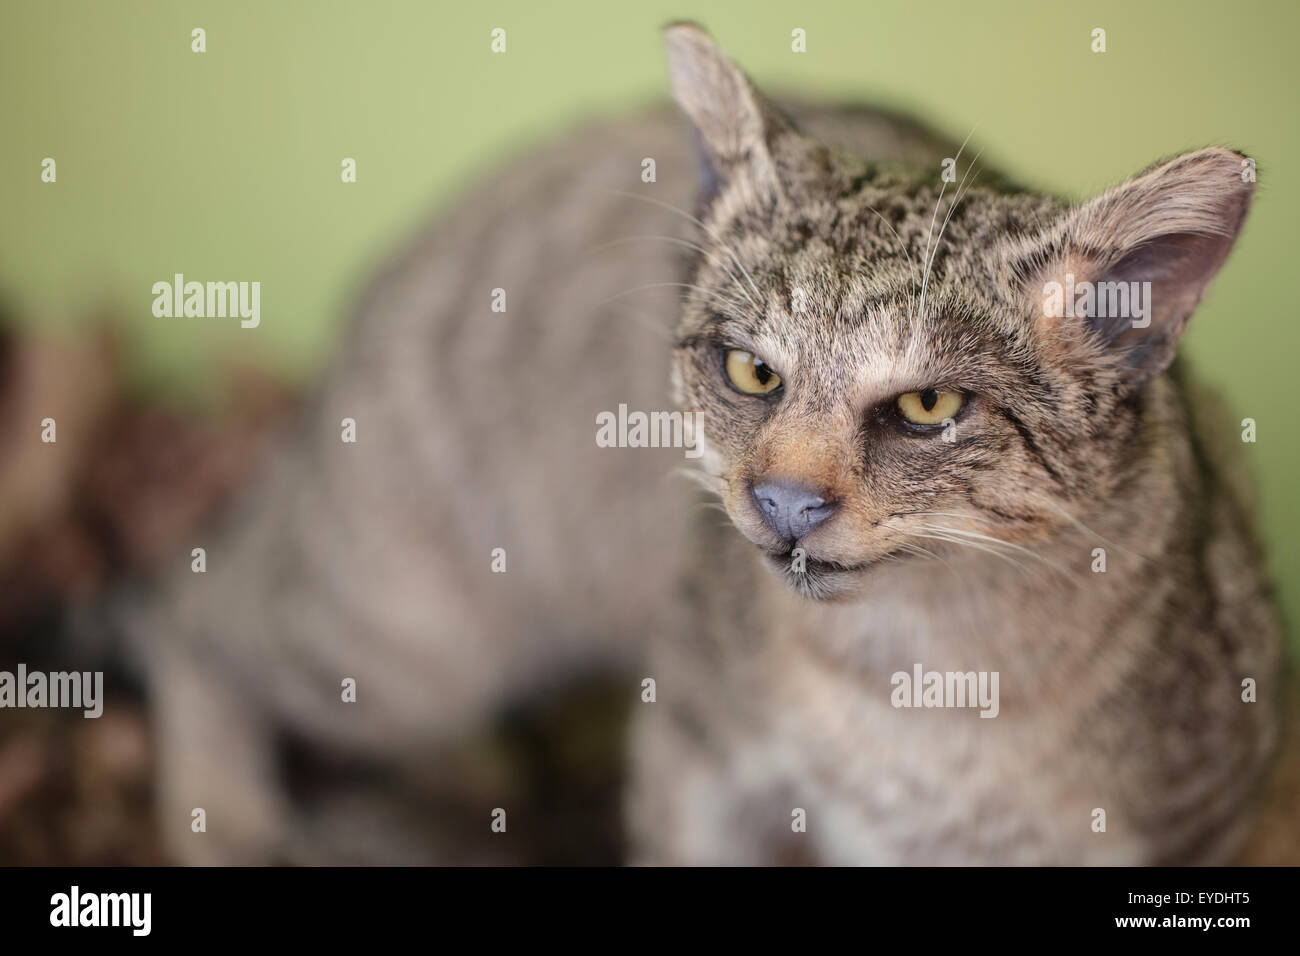 Taxidermied wildcat, close-up Foto Stock